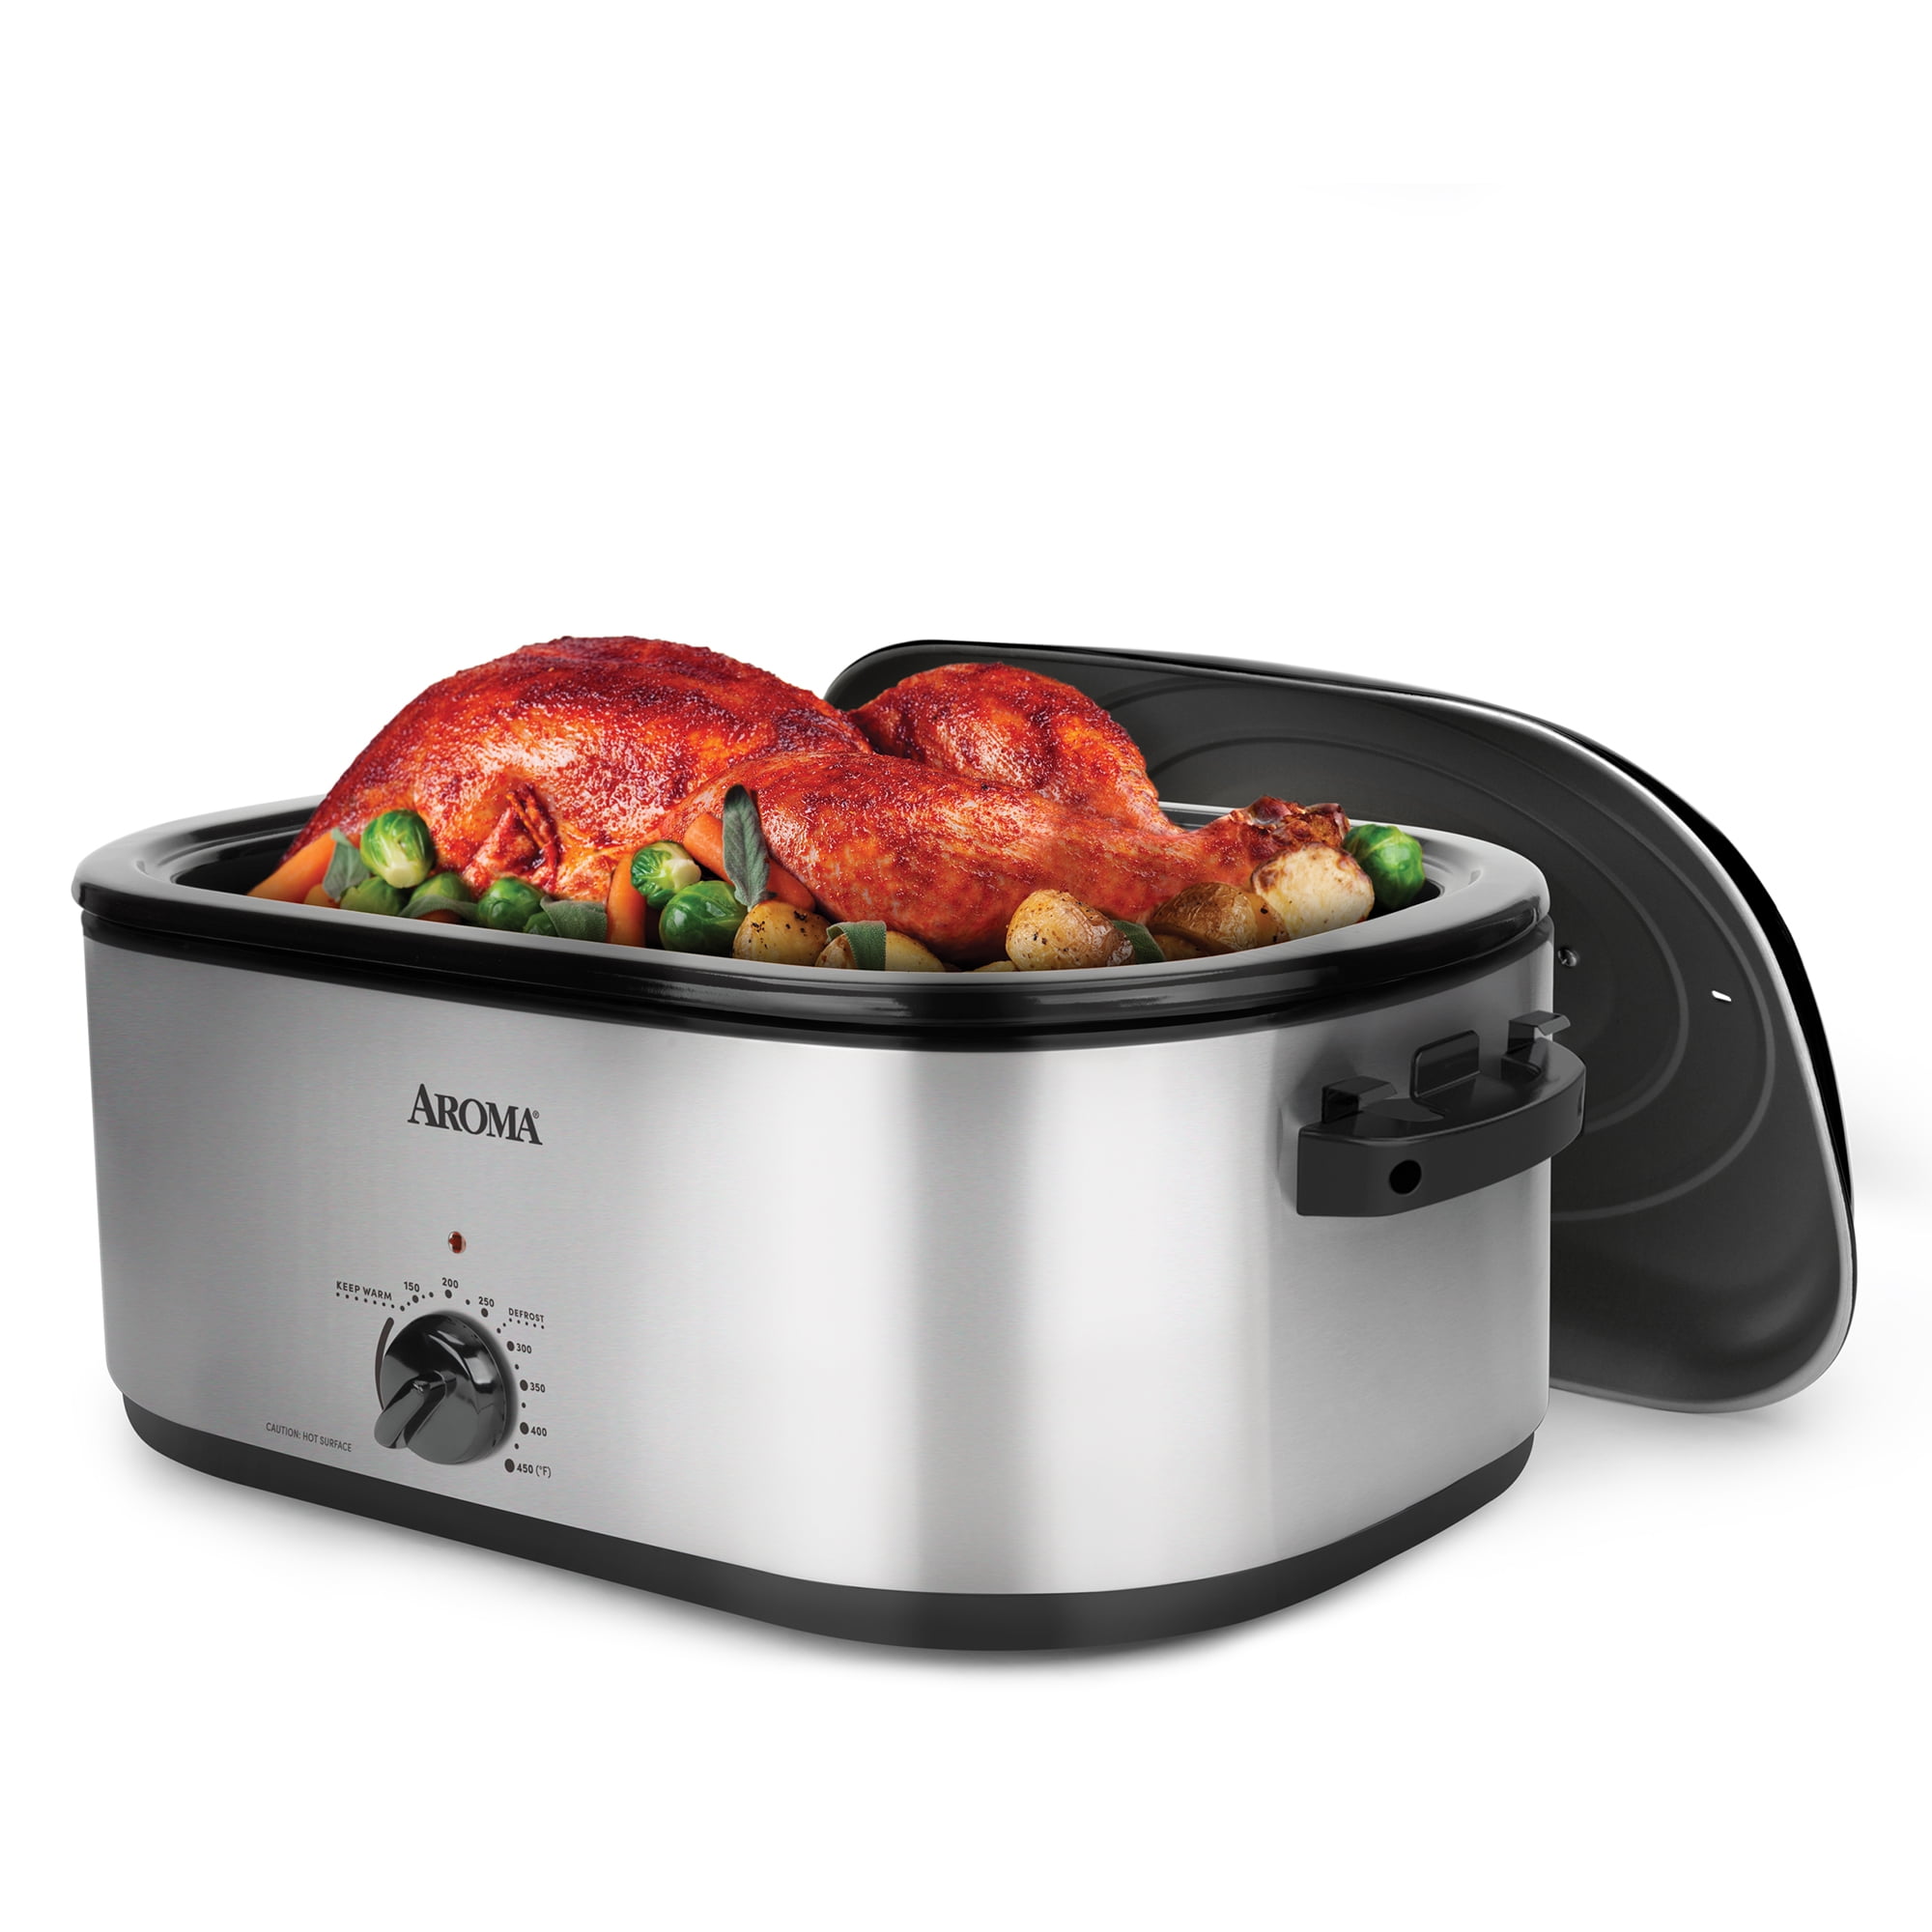 Aroma 22Qt Roaster Oven Electric Bake Home Kitchen Countertop Slow Cooker